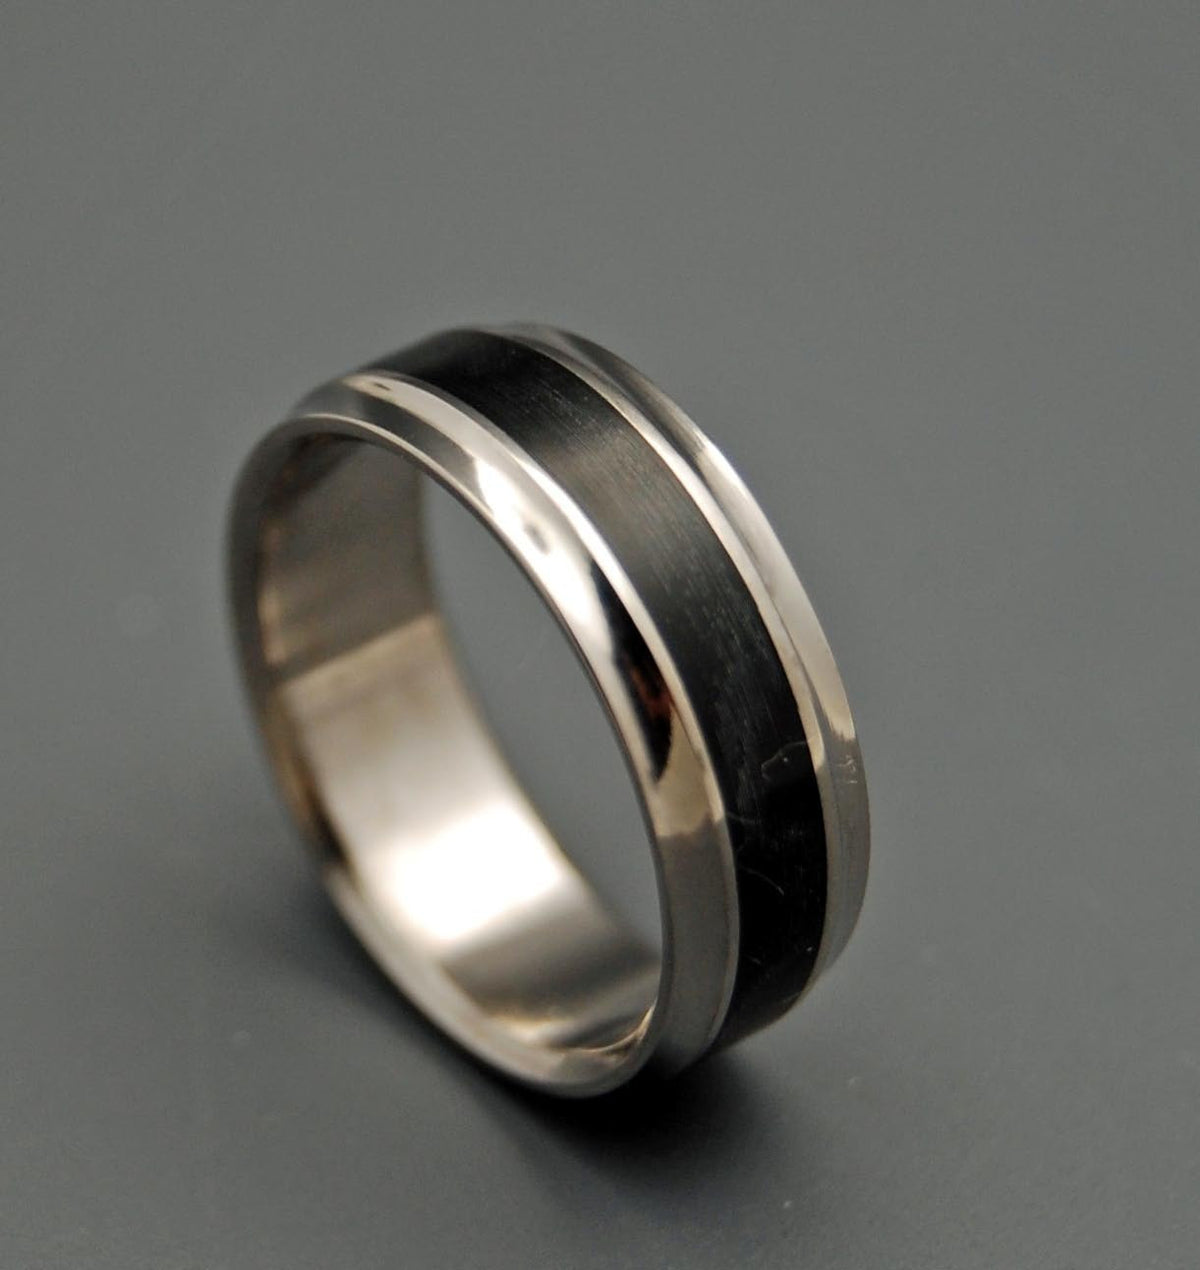 Black Beauty | Handcrafted Titanium Wedding Ring - Minter and Richter Designs